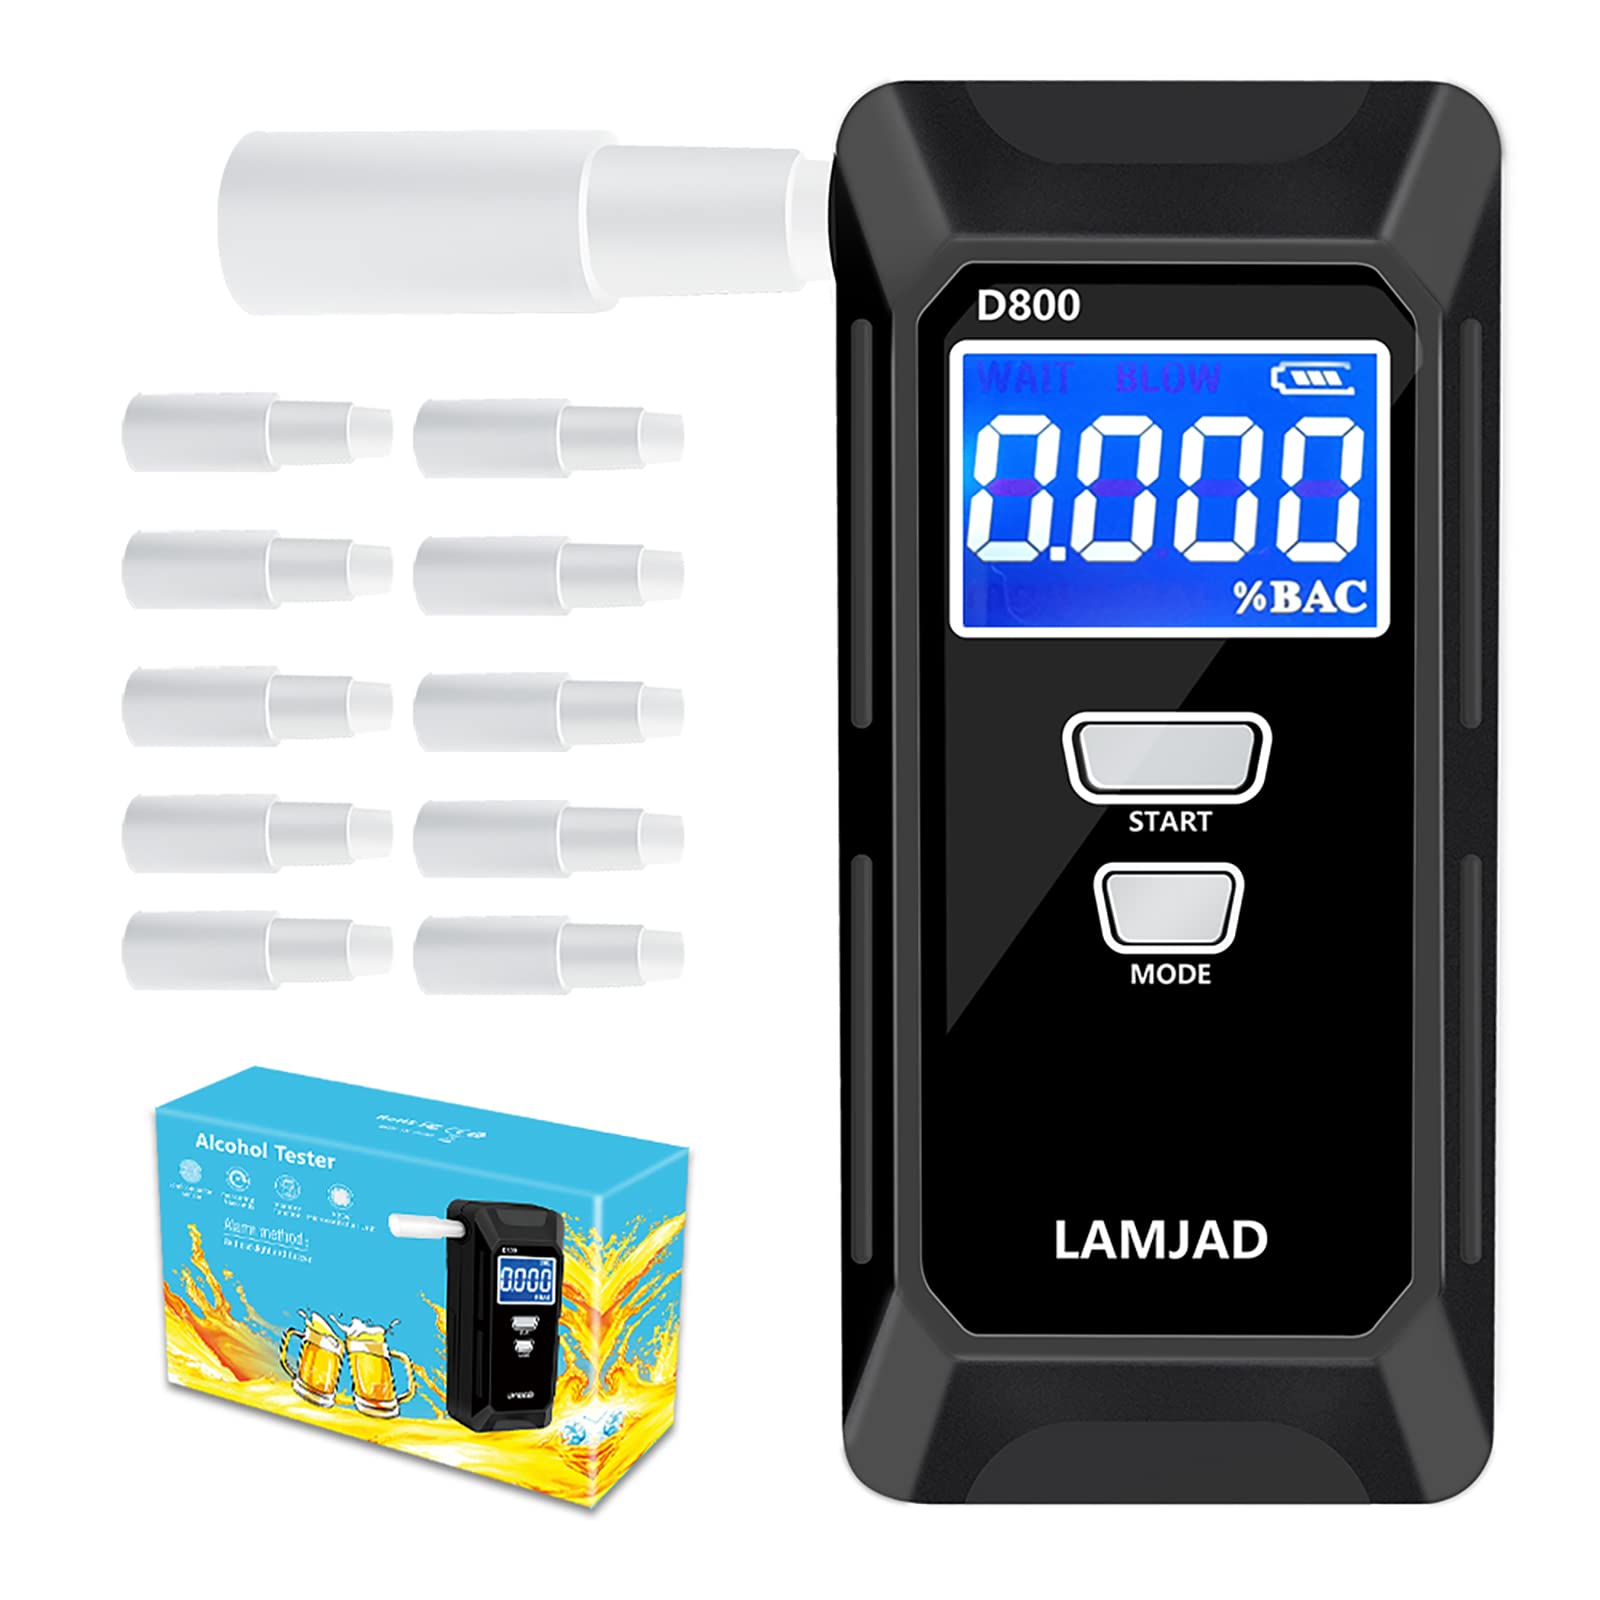 Breathalyzer Digital LCD Alcohol Breath Tester – Living Today